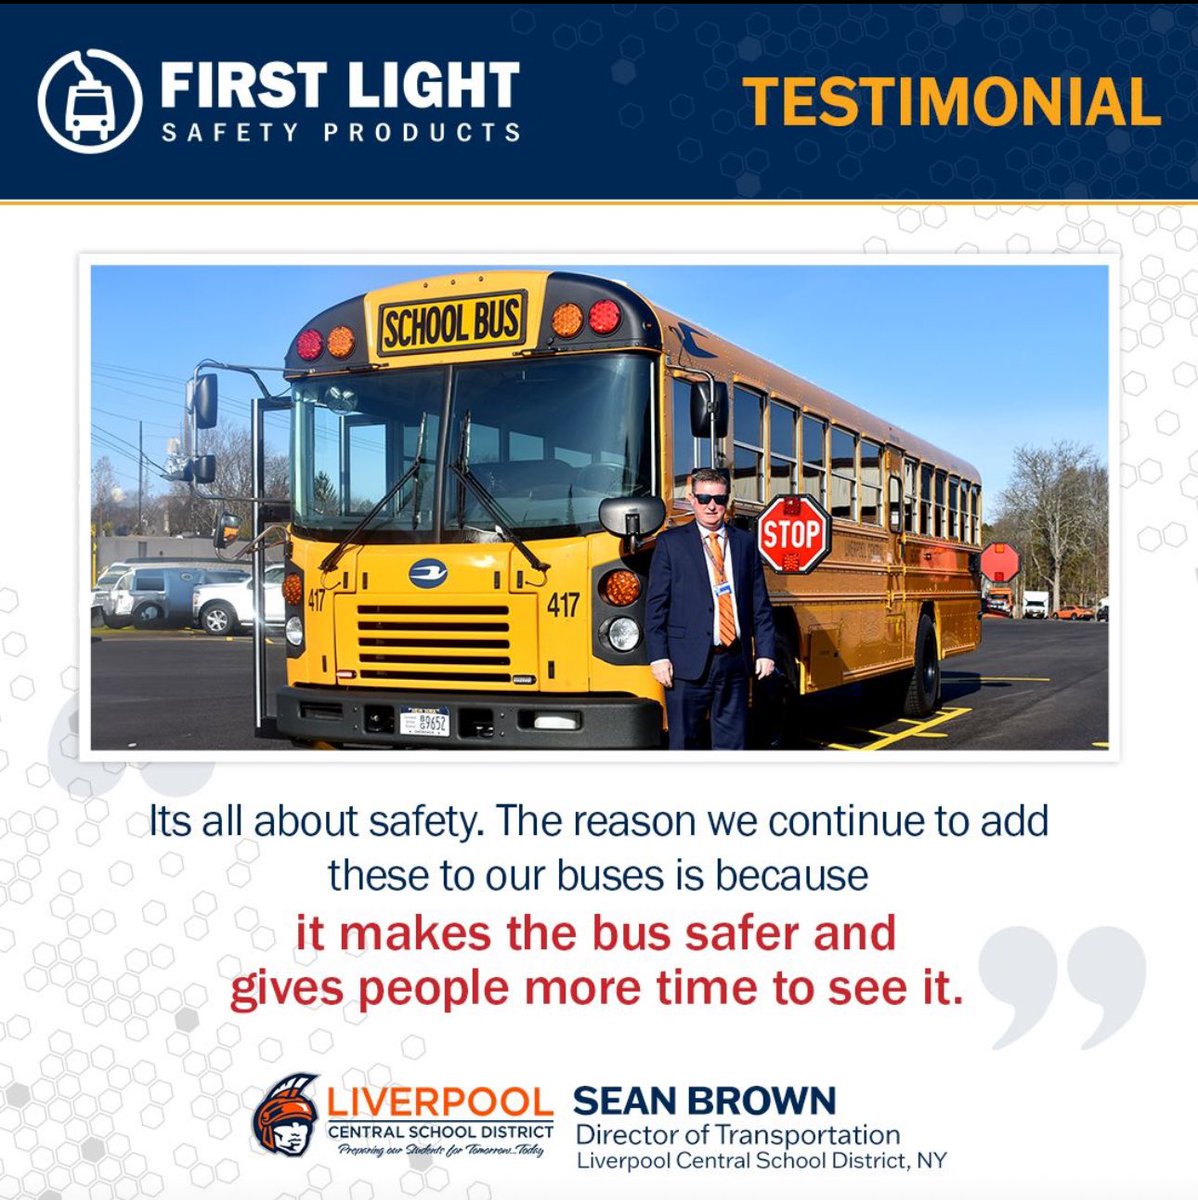 Liverpool Transportation recognized for Safety in National Magazine Article School Transportation News for April #LiverpoolLeads